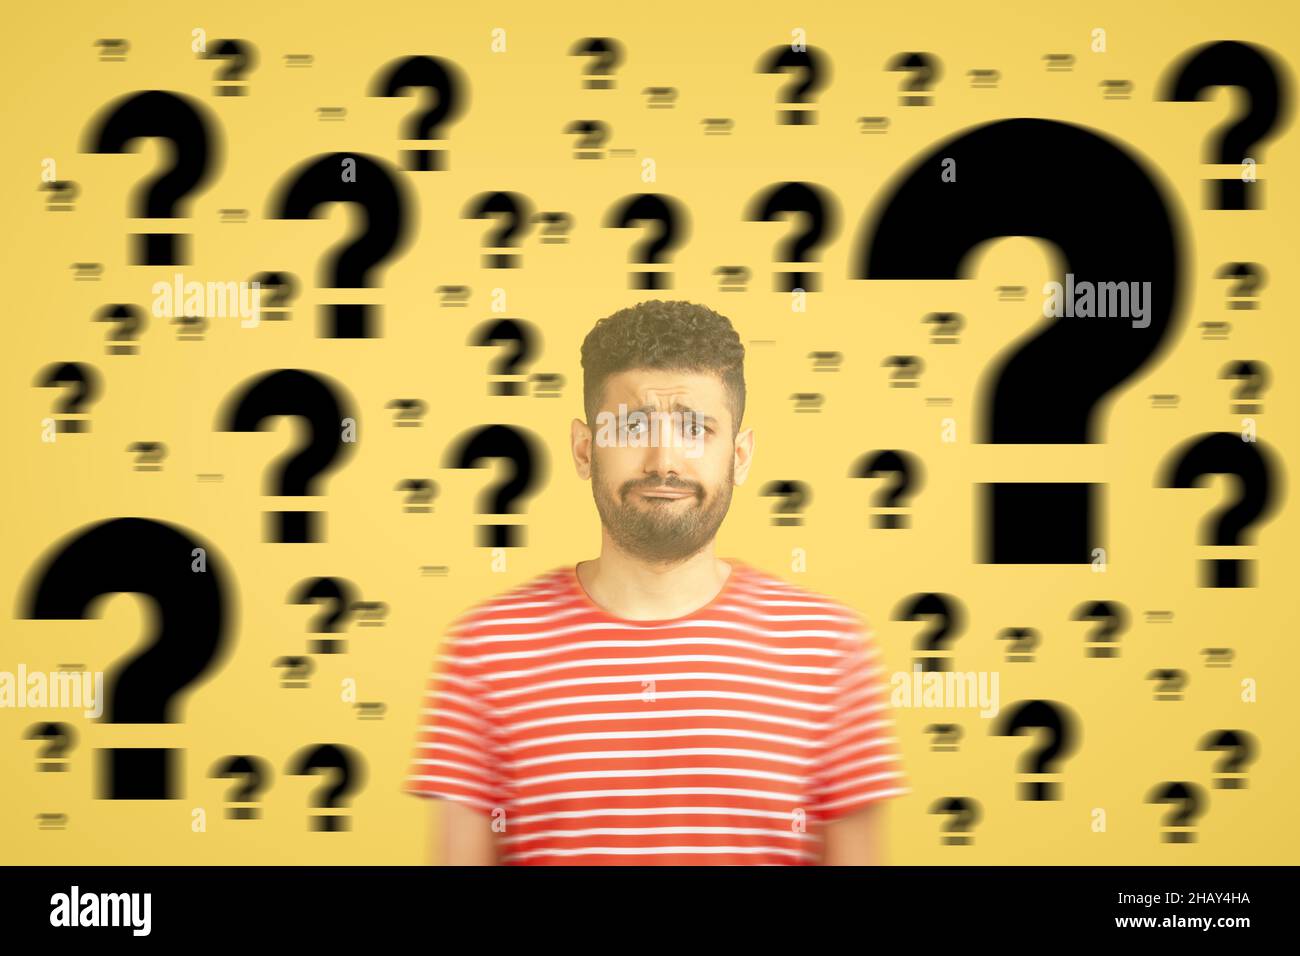 Confused thoughtful man looking with pensive sad face. work pressure, trouble, overthinking concept. indoor shot on yellow background with many question mark. Stock Photo